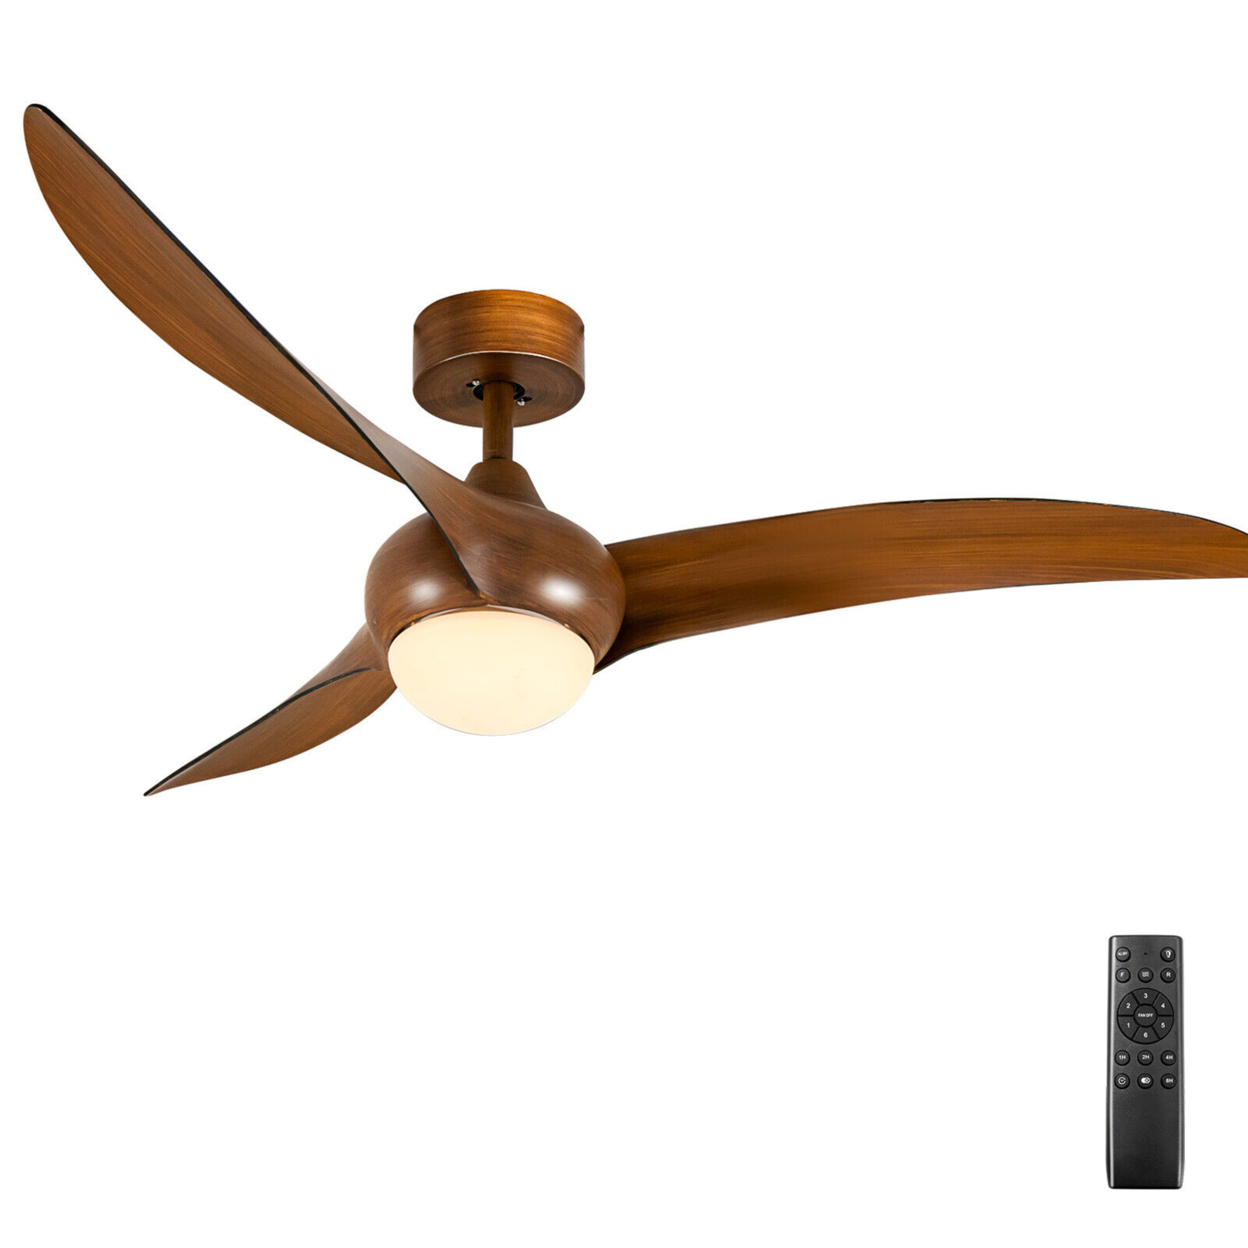 52 Inch Ceiling Fan W/ Light Changeable Light Color Reversible DC Motor For Home